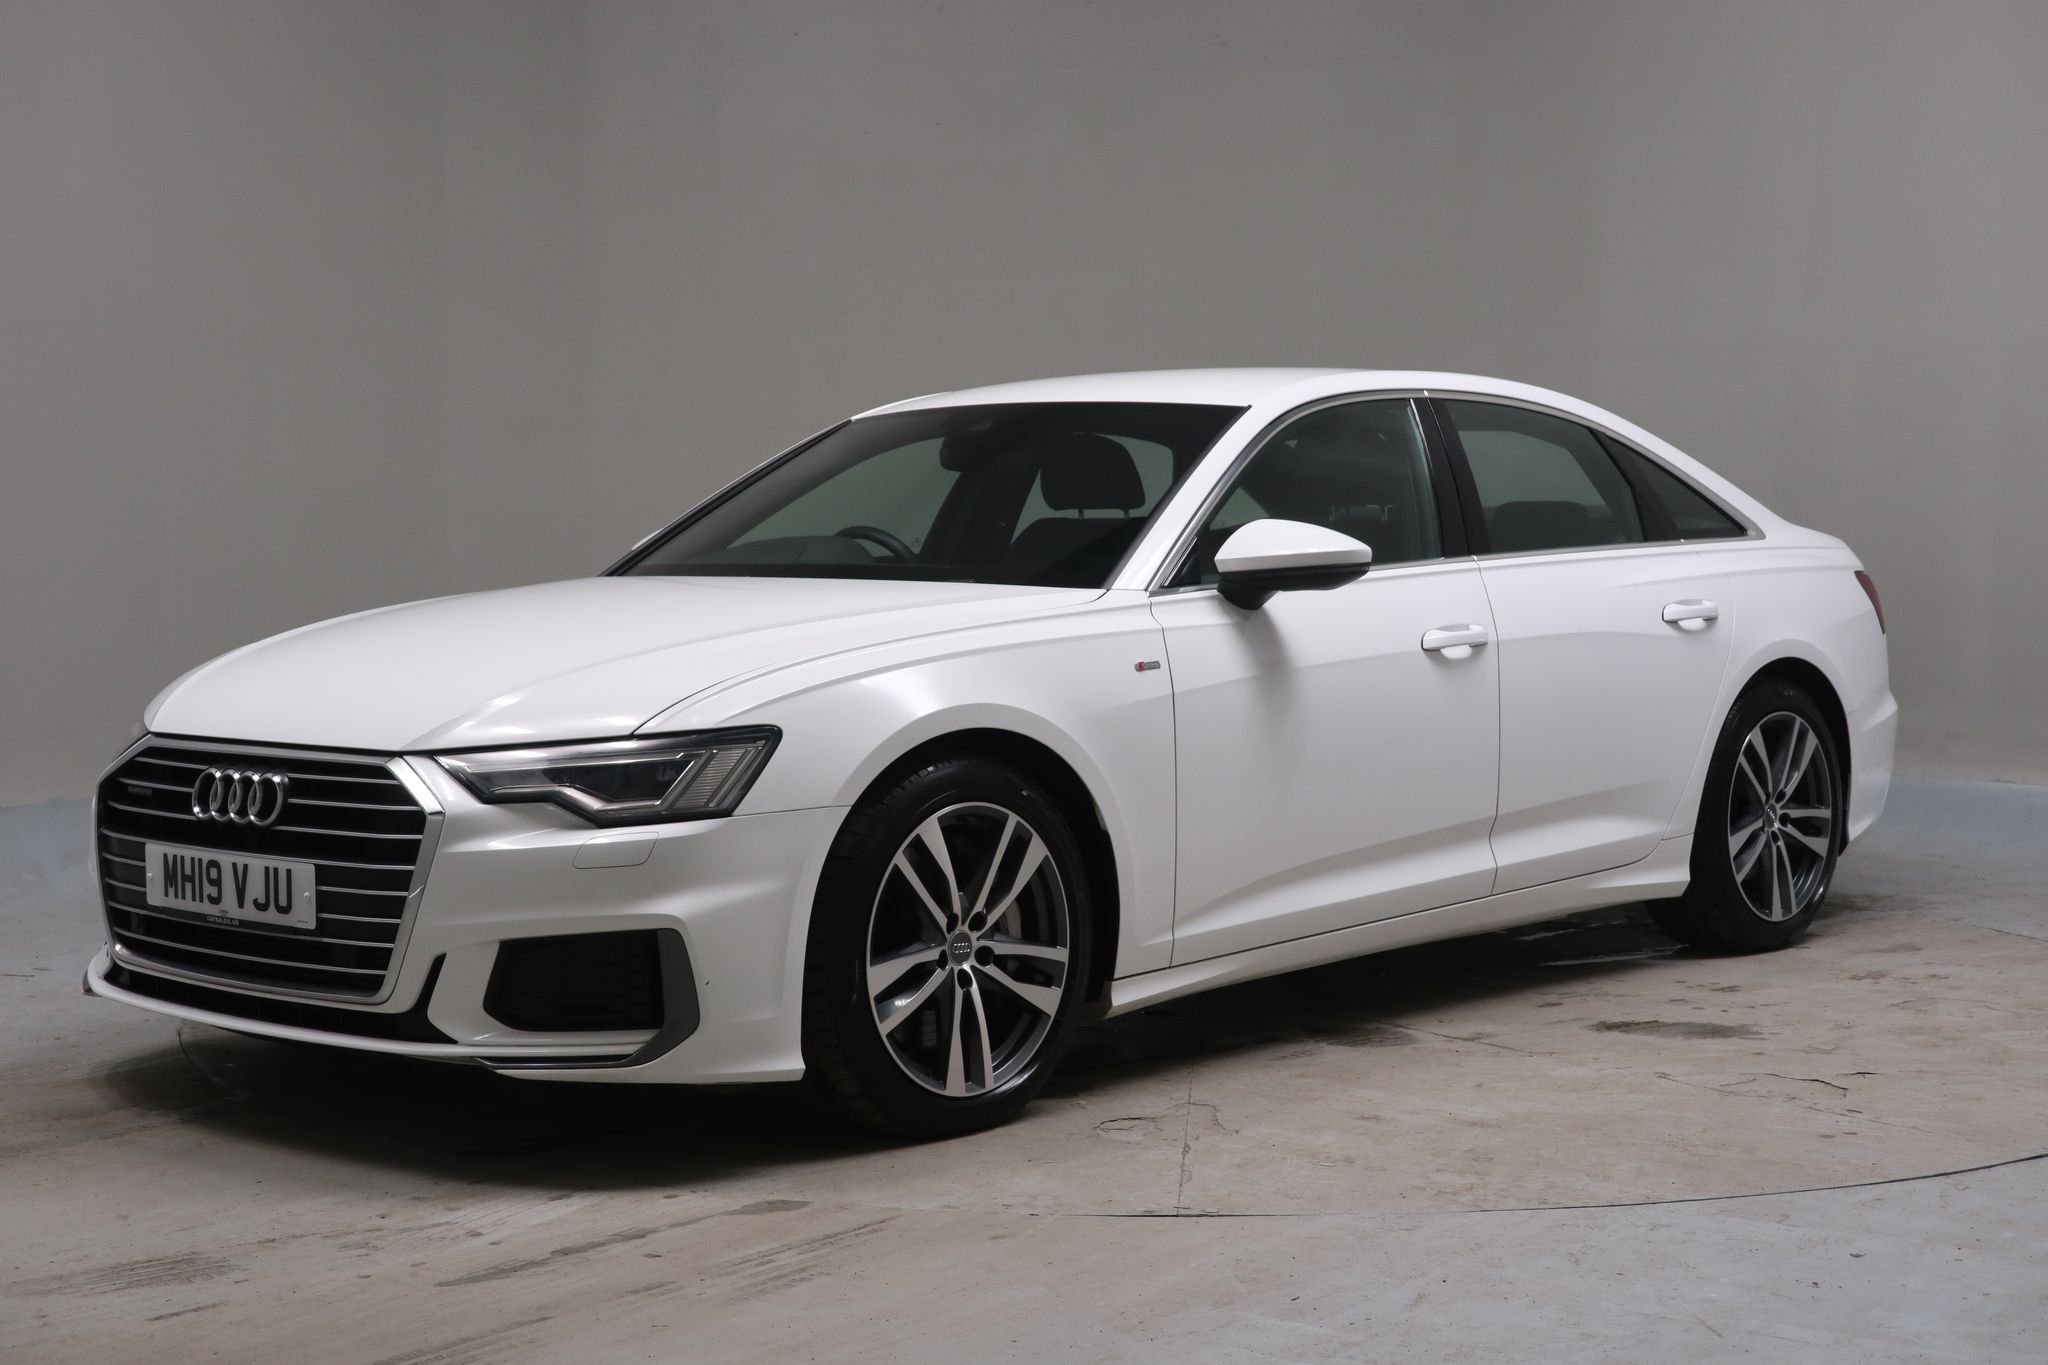 2019 used Audi A6 Saloon 3.0 TFSI V6 55 S line S Tronic quattro (340 ps)